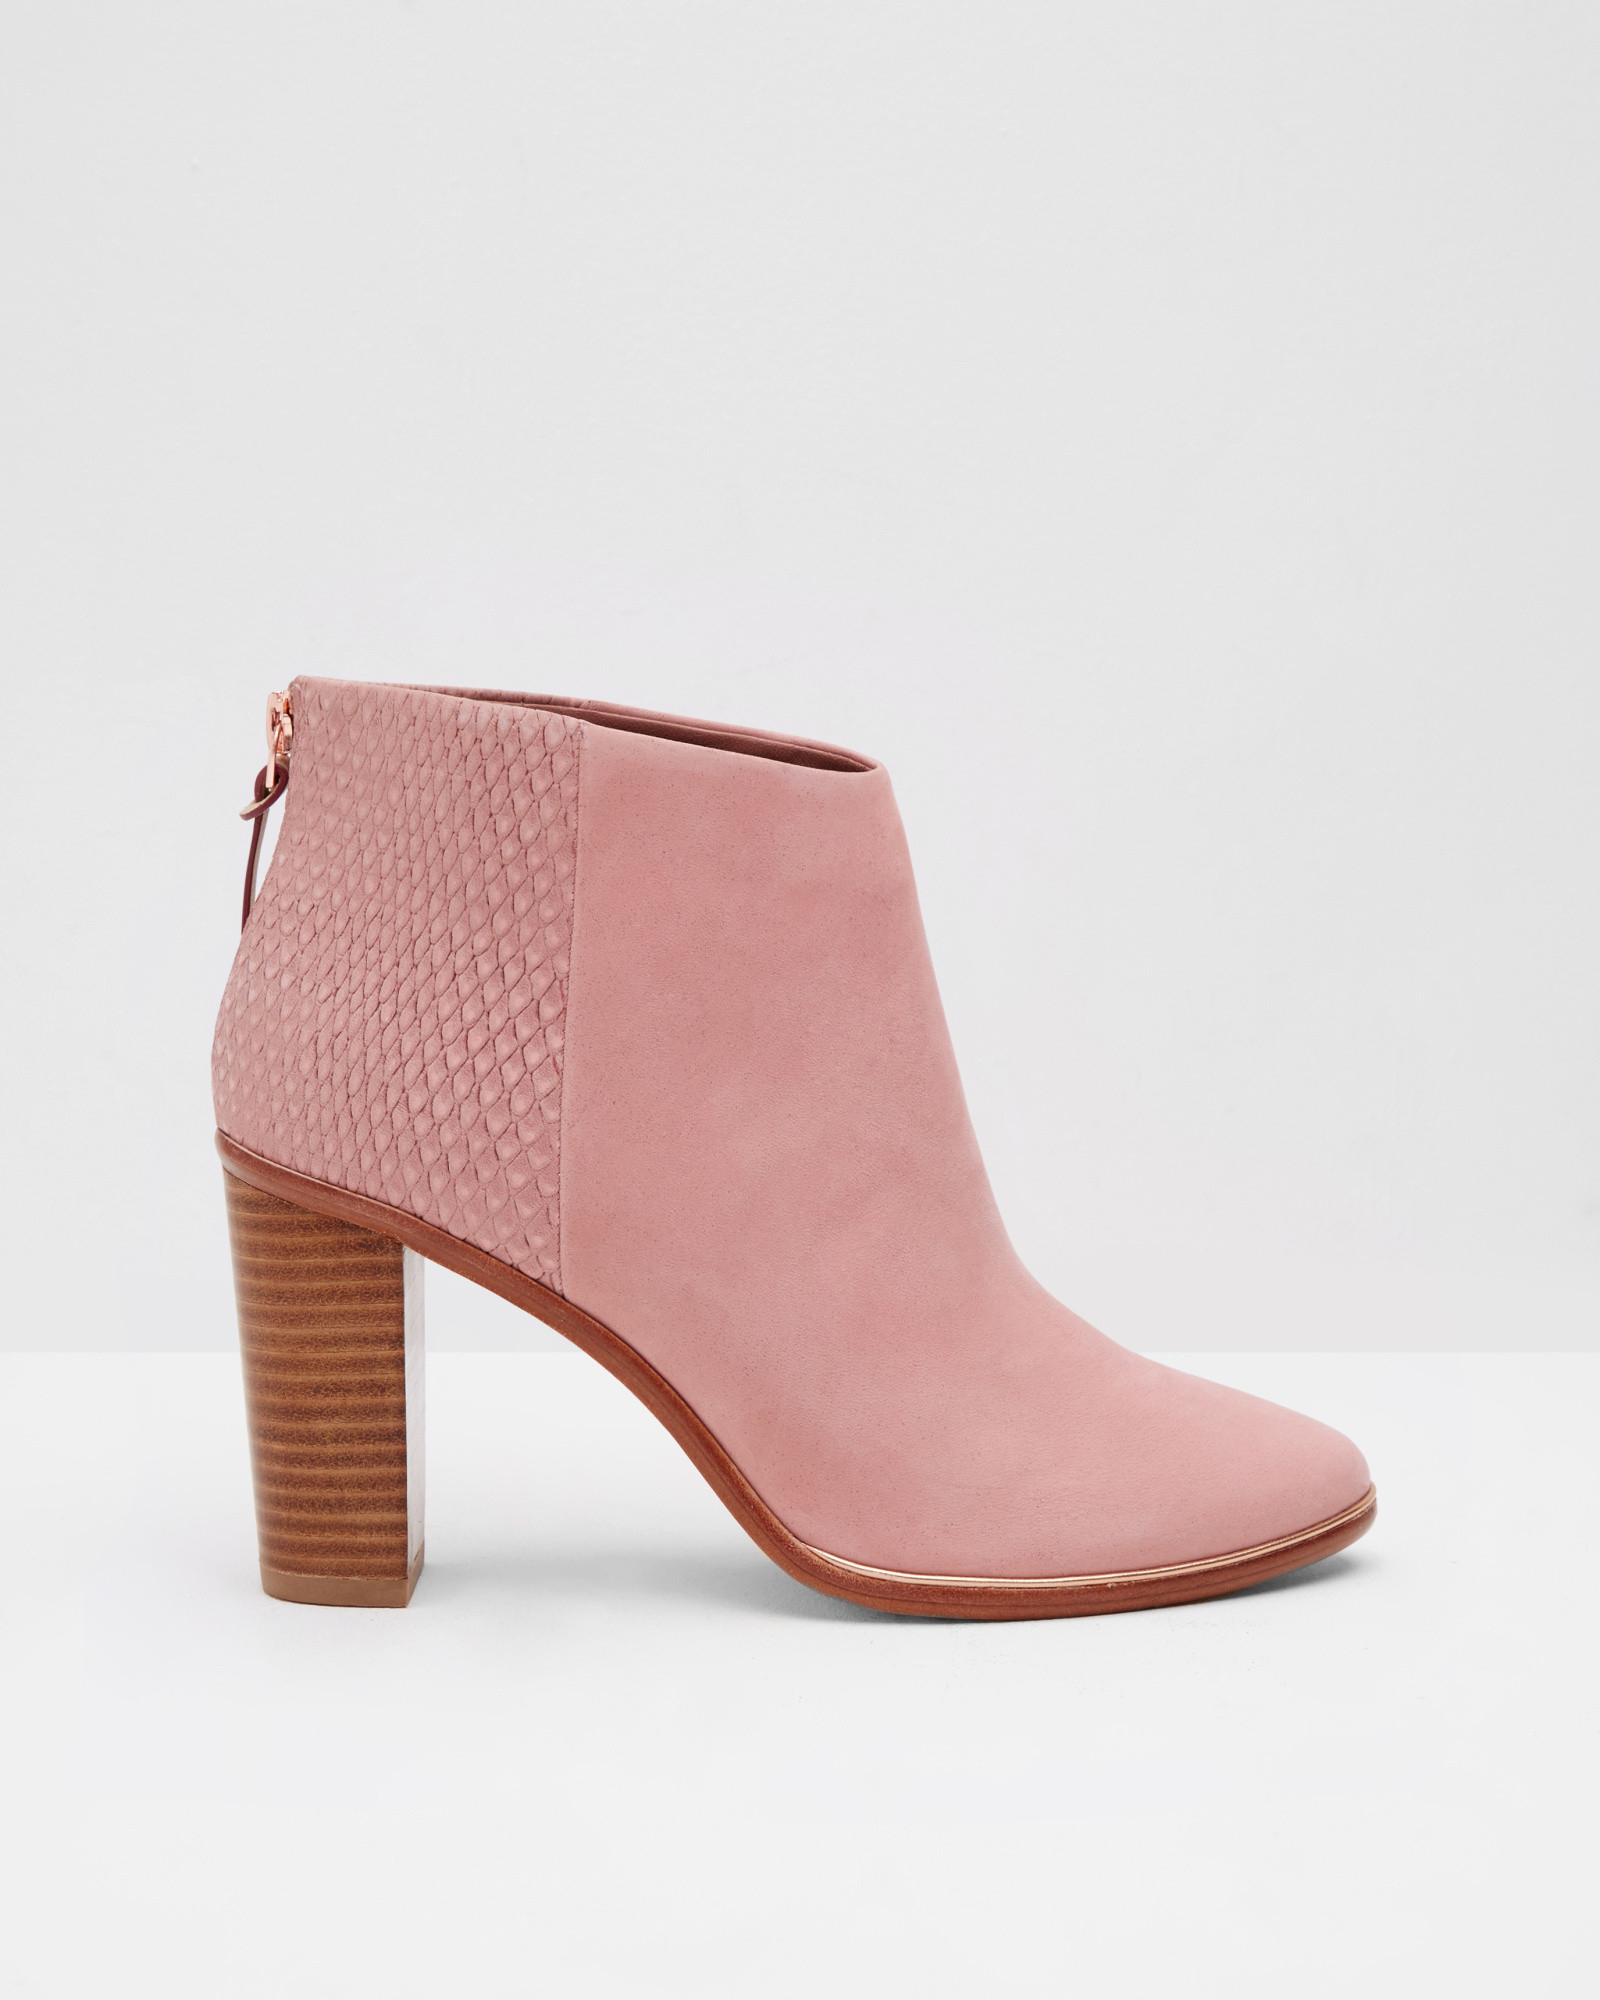 Ted Baker Textured Leather Ankle Boots in Dusky Pink (Pink) - Lyst